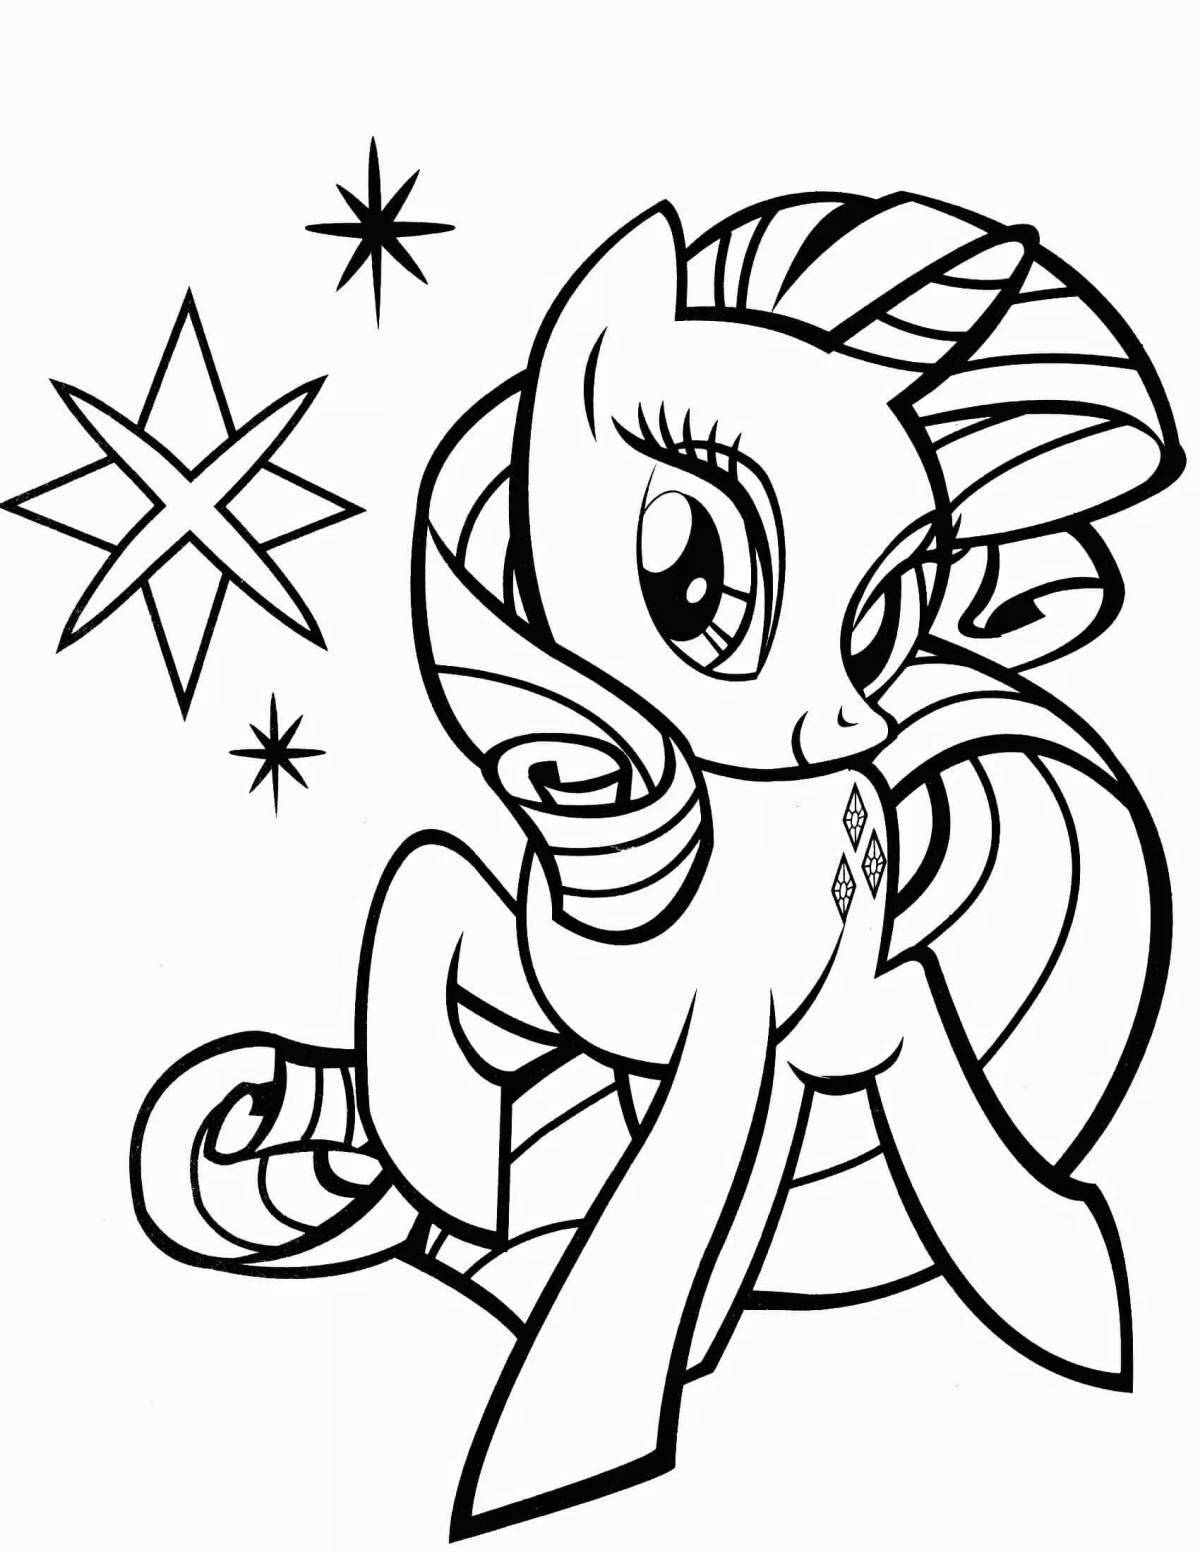 My little pony glowing coloring page